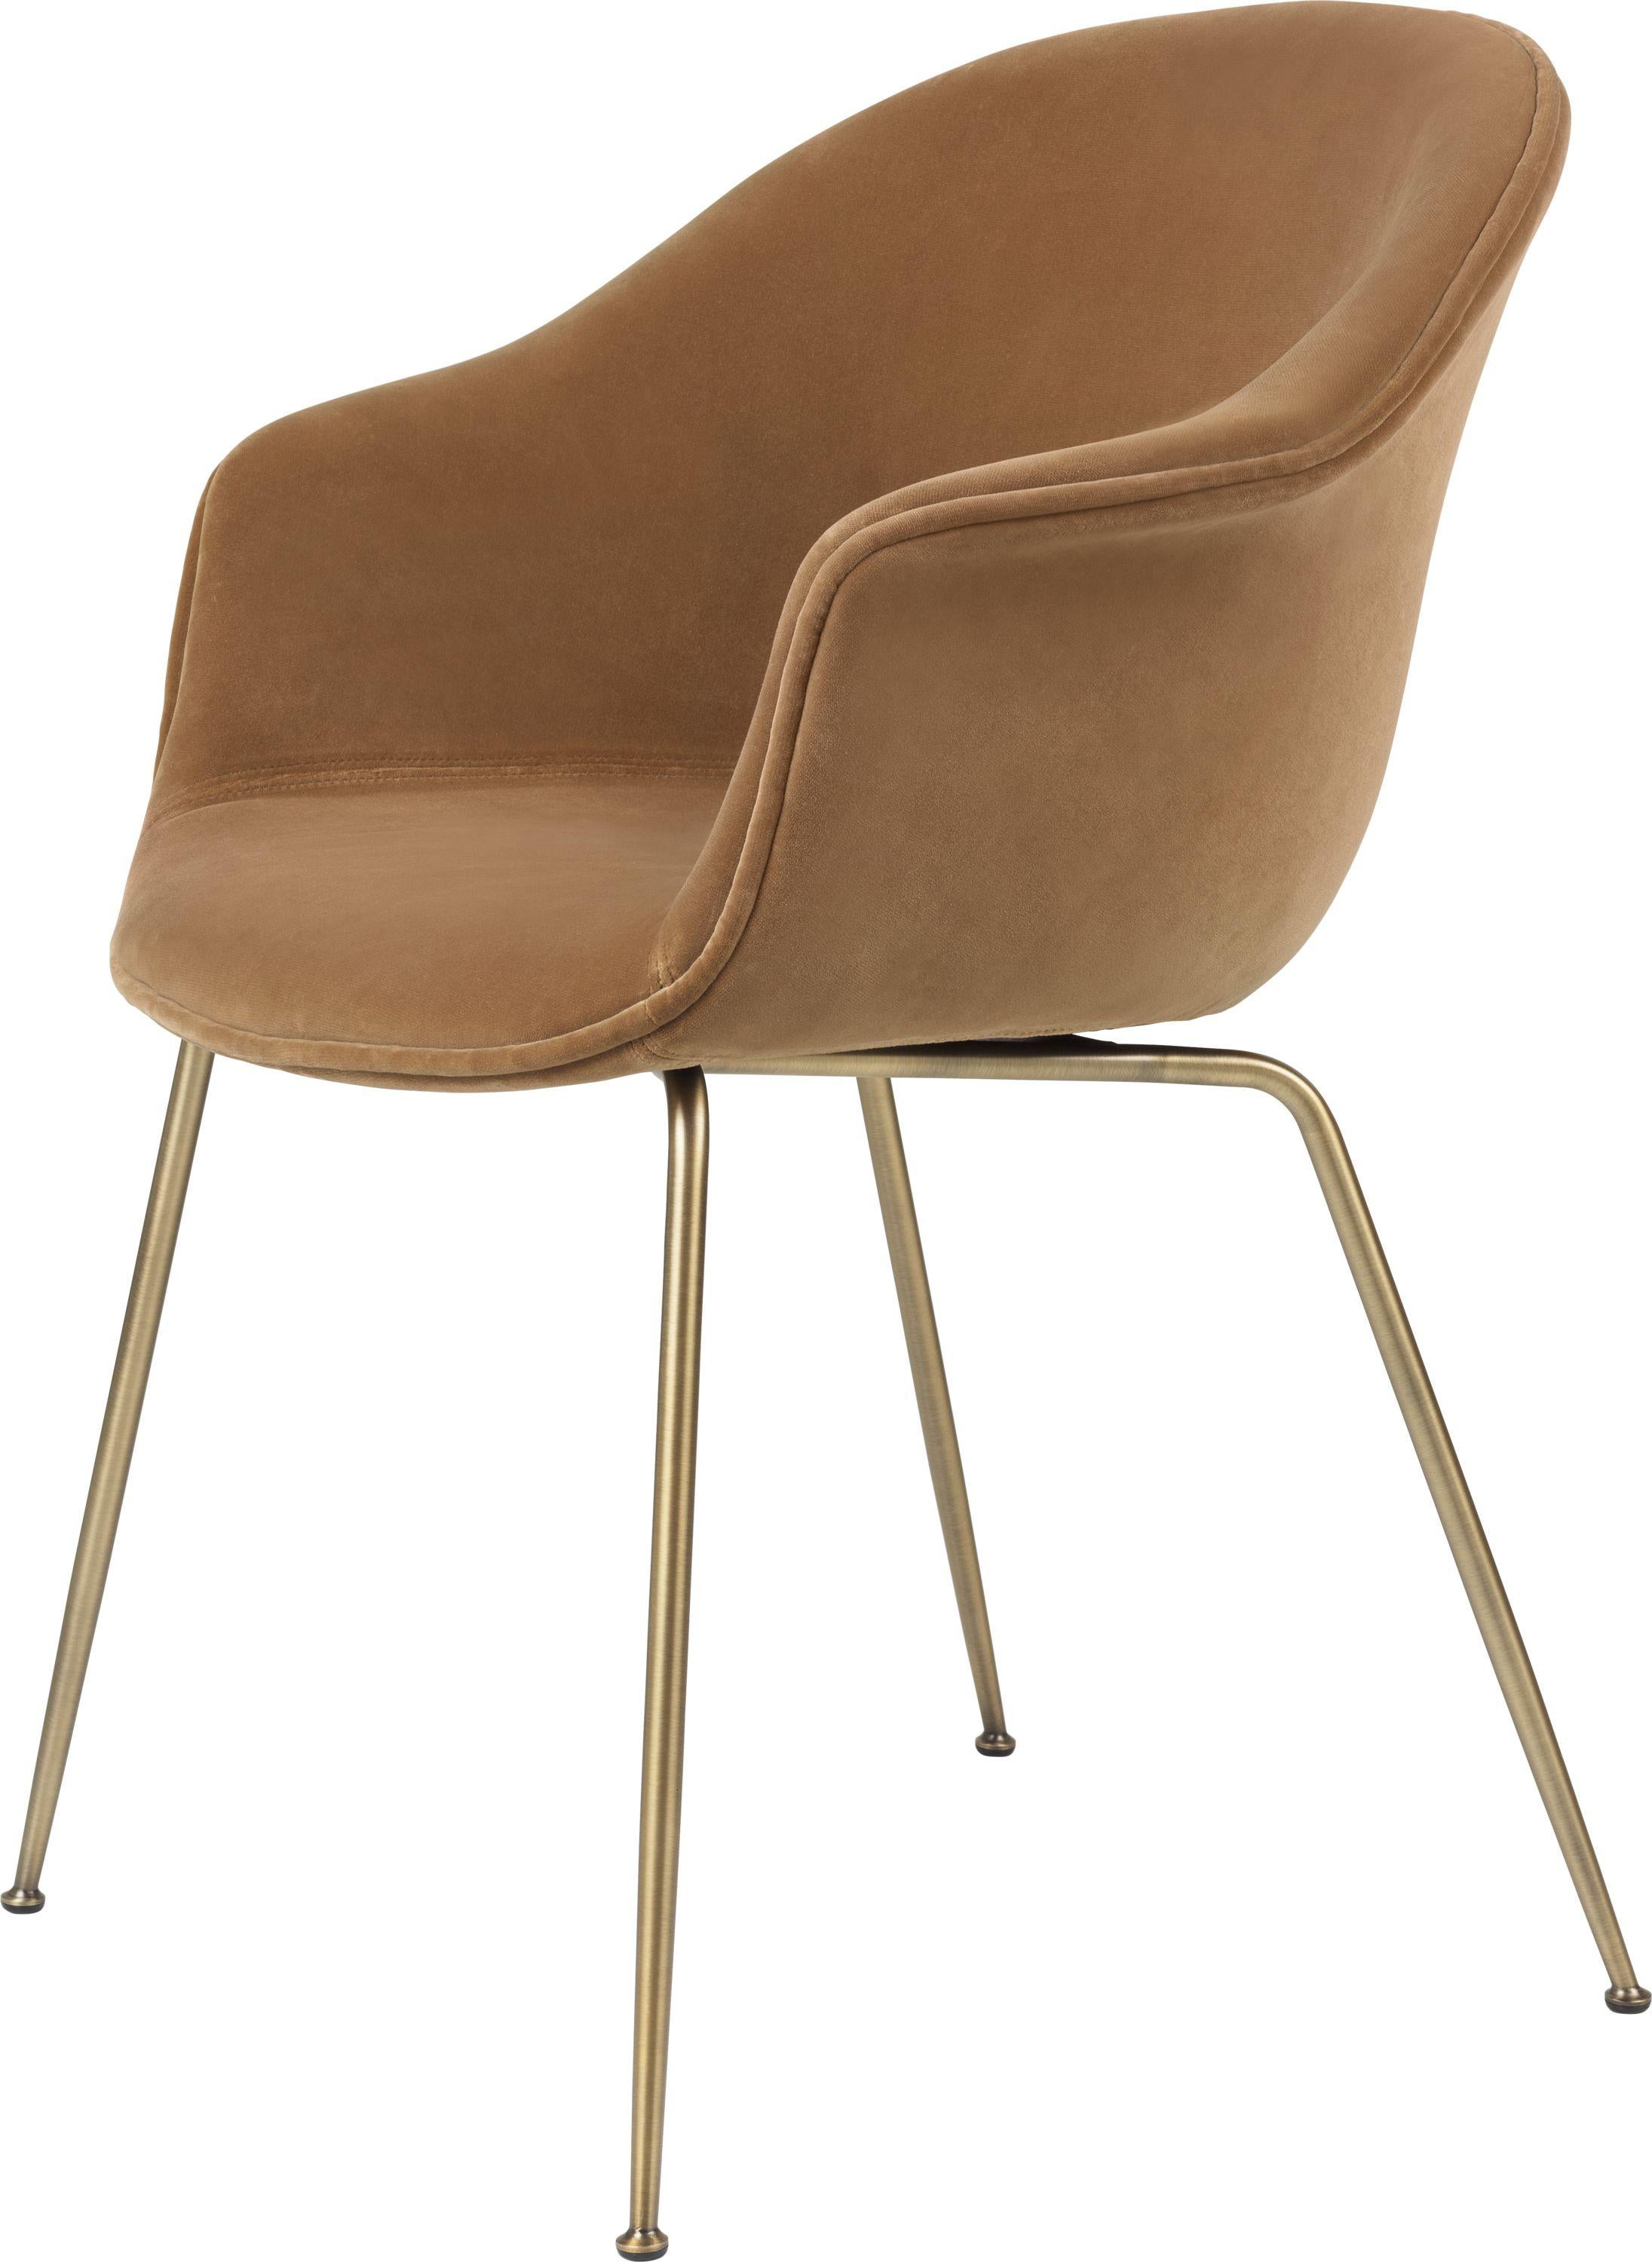 GamFratesi 'Bat' Dining Chair in Brown with Antique Brass Conic Base 2